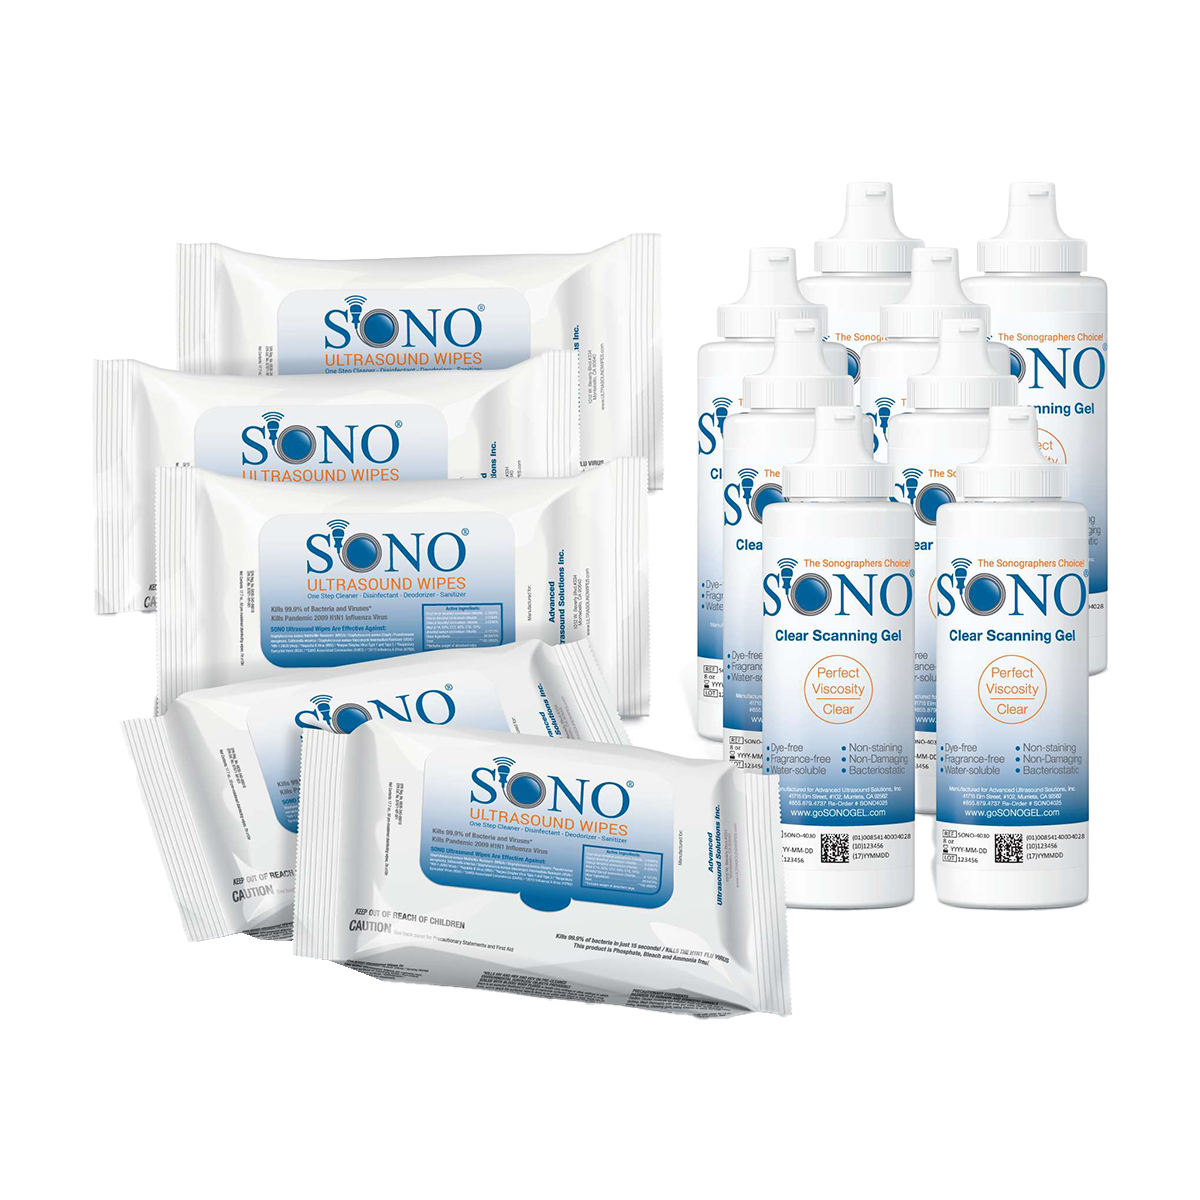 SONO Ultrasound Cleaning & Gel Combo Kits - 150-200 Exam Combo Pack - Advanced Cleaning and Gel Solution for Medical Exams